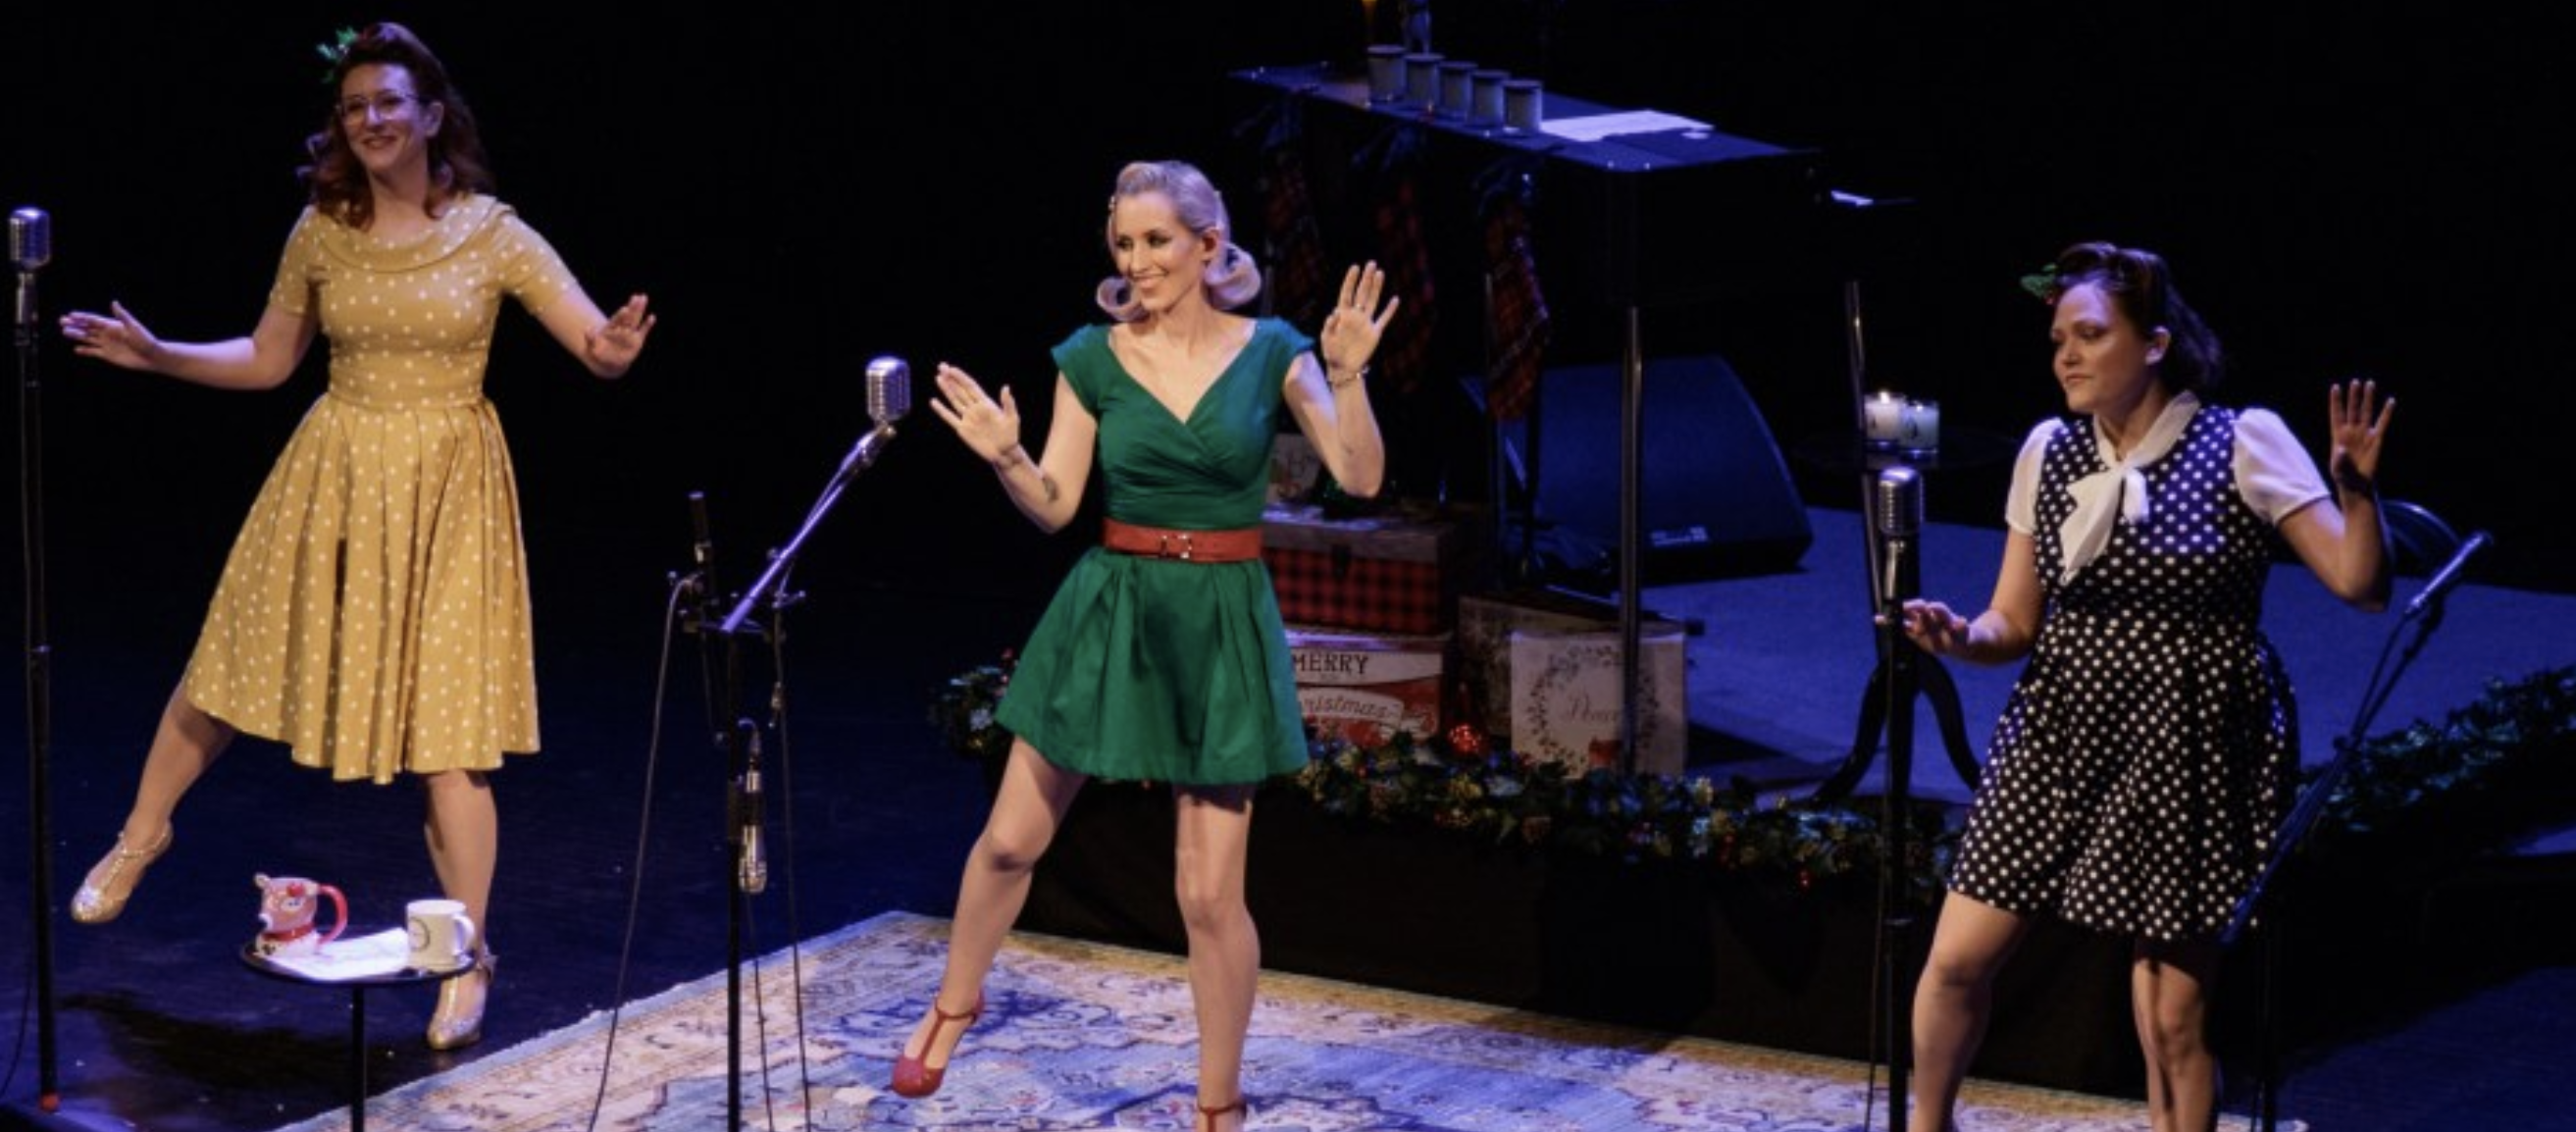 The Ingrid Michaelson Trio – It’s Almost Christmas Tour